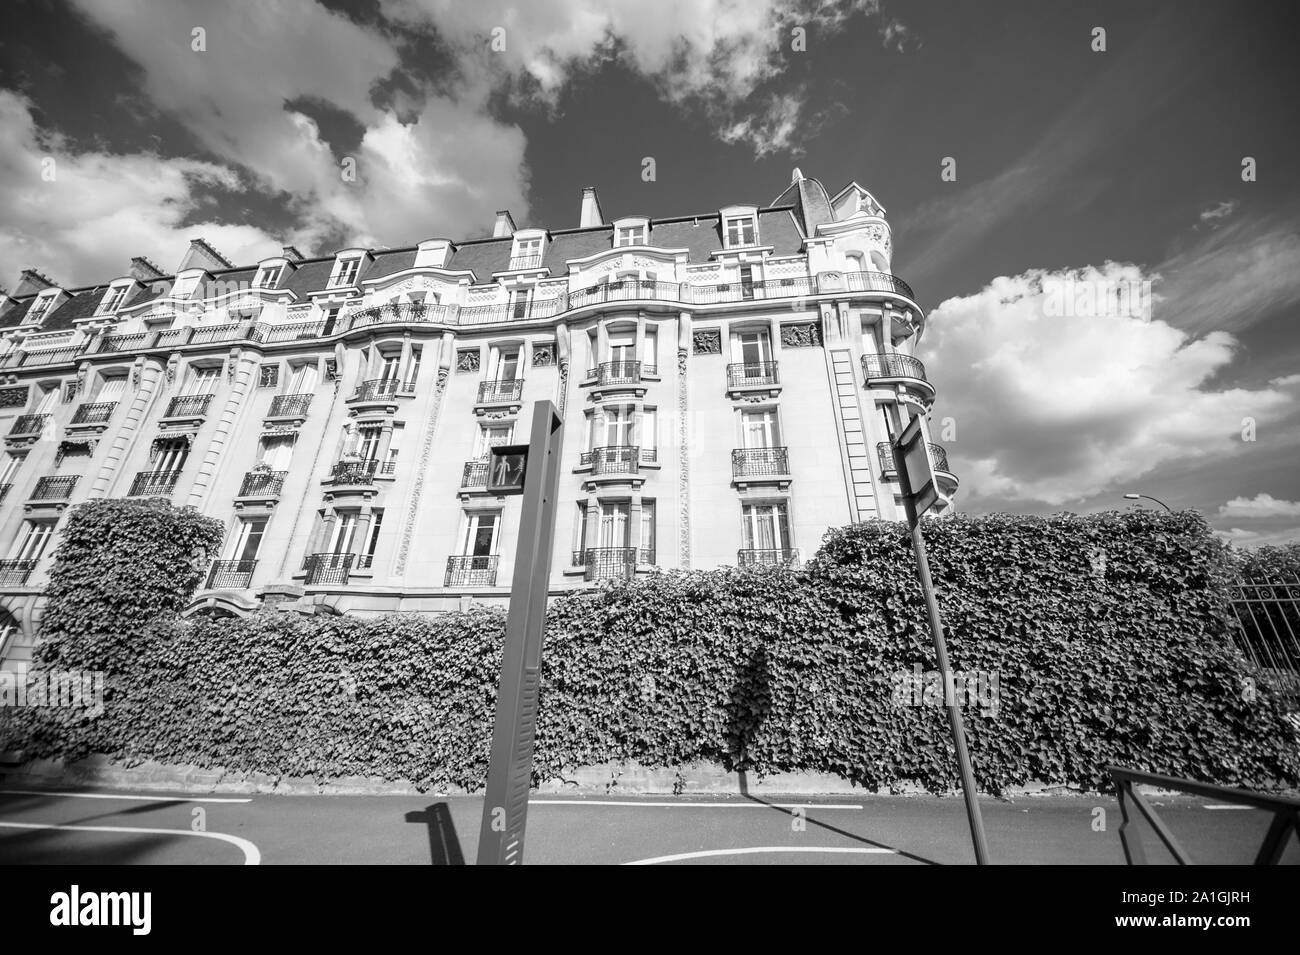 Black and white image of low wide angle view of Parisian property apartment building with French balconies and clear sky with some scattered clouds Stock Photo